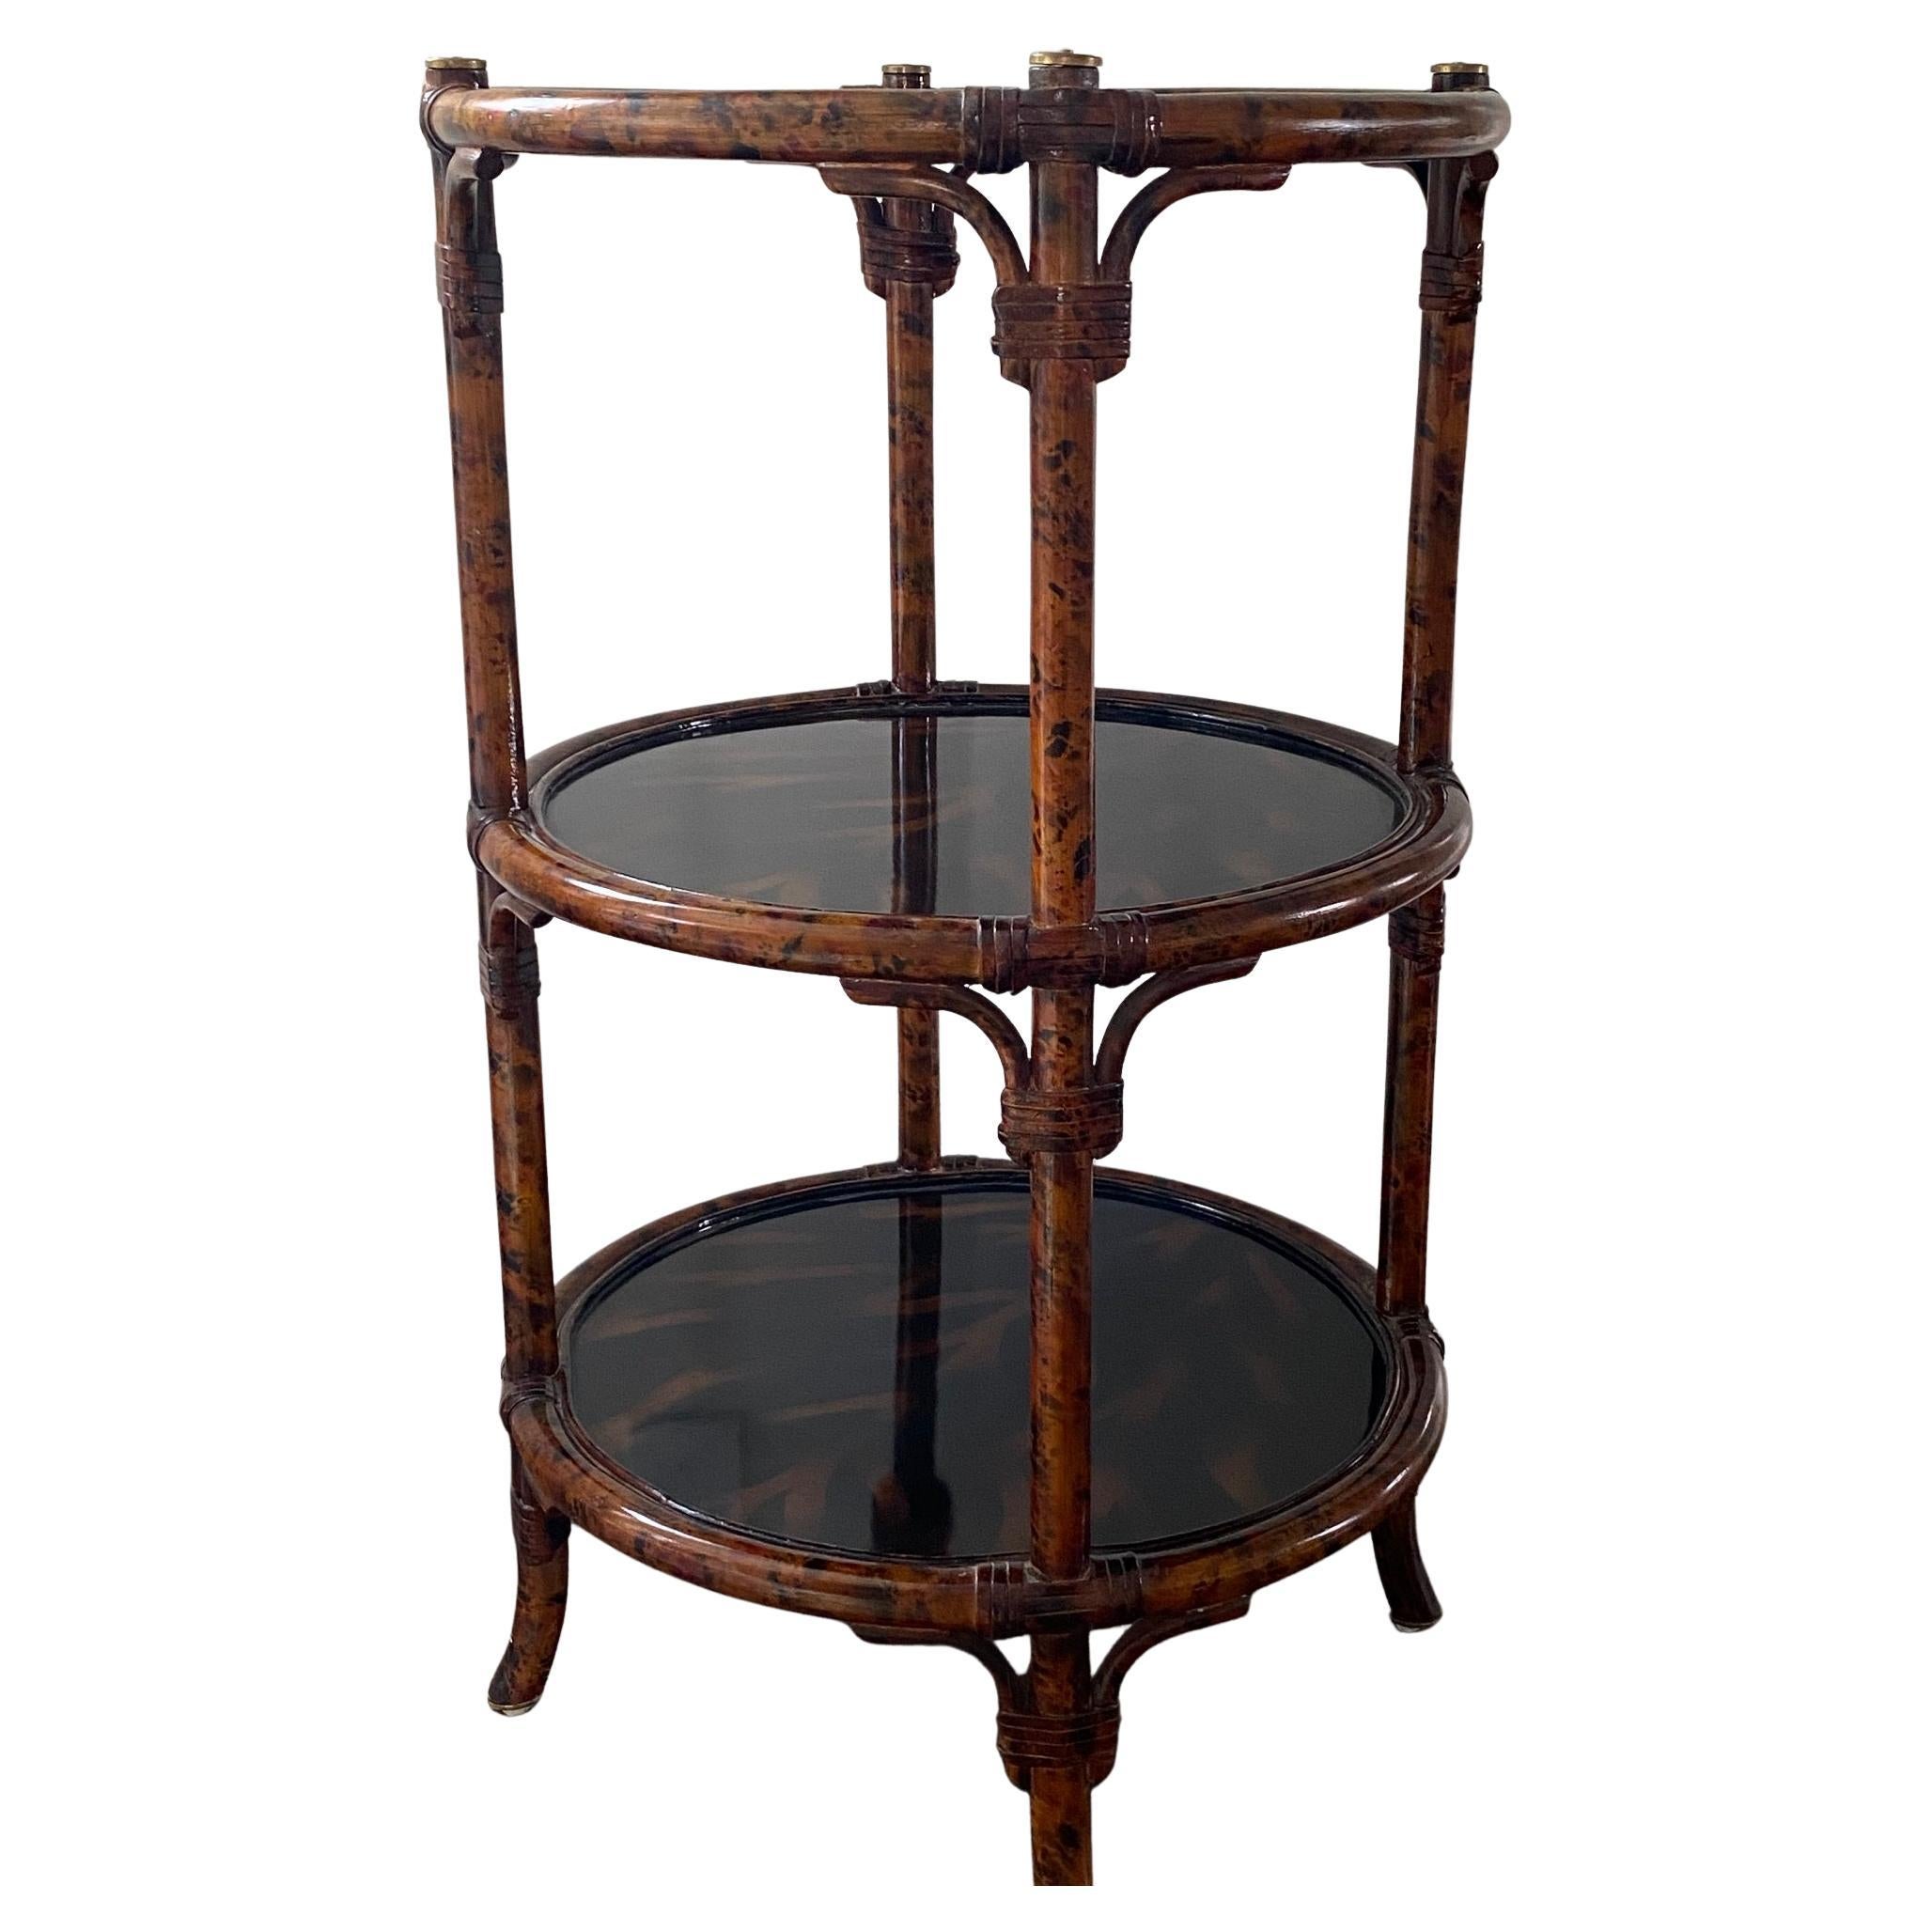 Rich looking highly lacquered round 3-tier faux tortoise and bamboo end table having handsome rattan wrapping the joints and 4 round brass medallions around the periphery.
10.25 bottom tier to middle tier
11